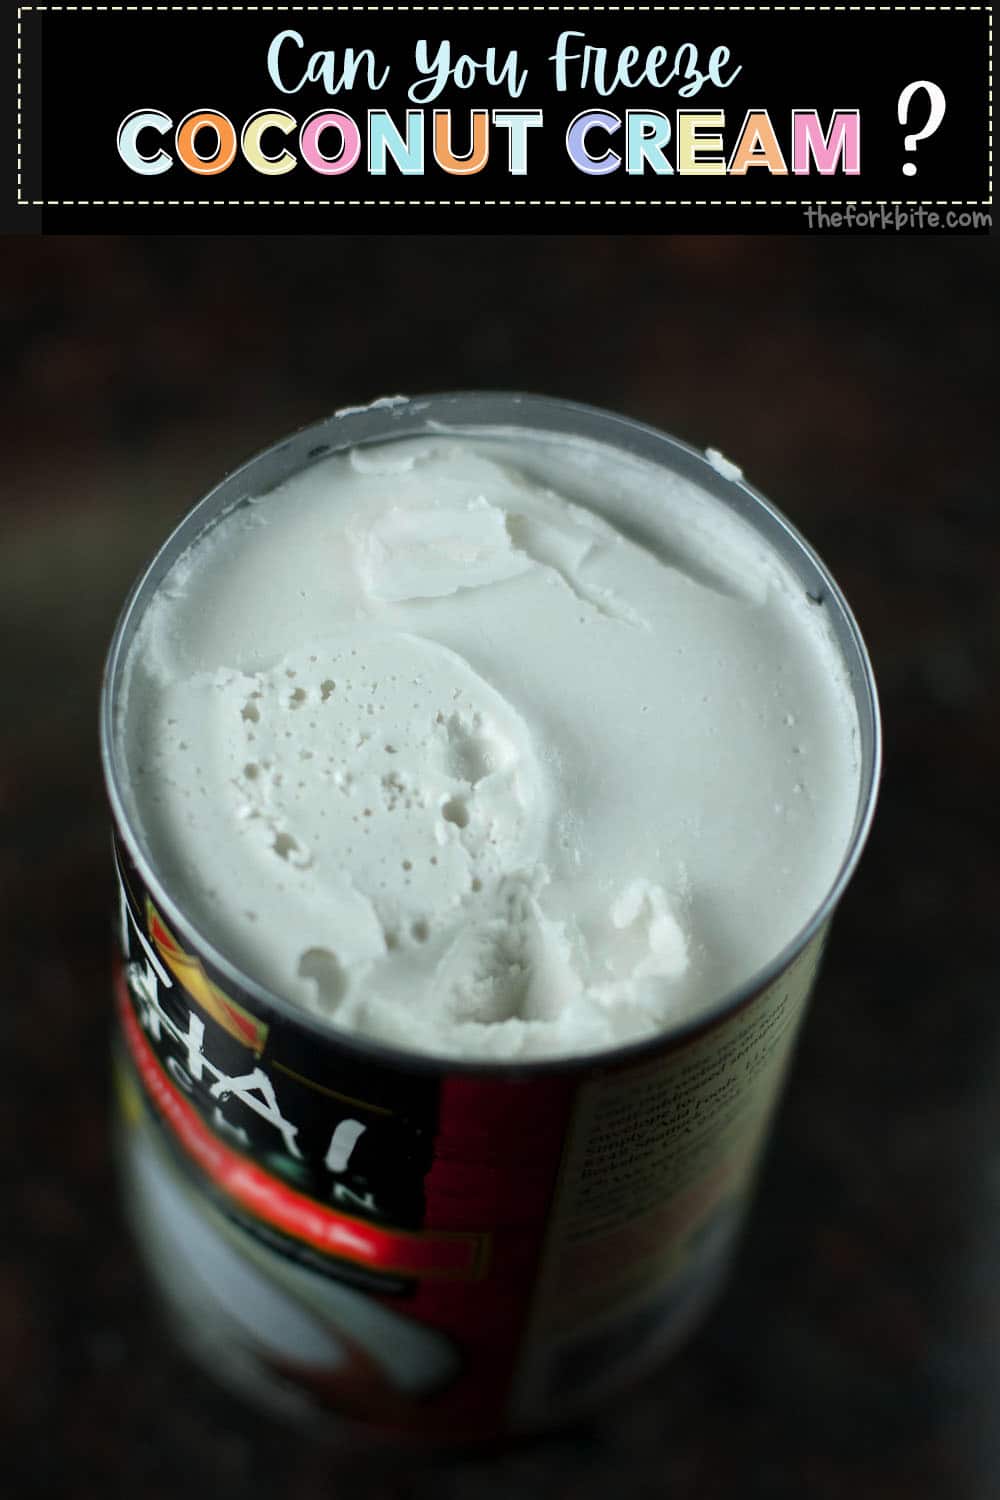 Coconut cream doesn't have much of a shelf-life once the can has been opened. It deteriorates rather quickly. You can, however, extend coconut cream's shelf life if you know how.